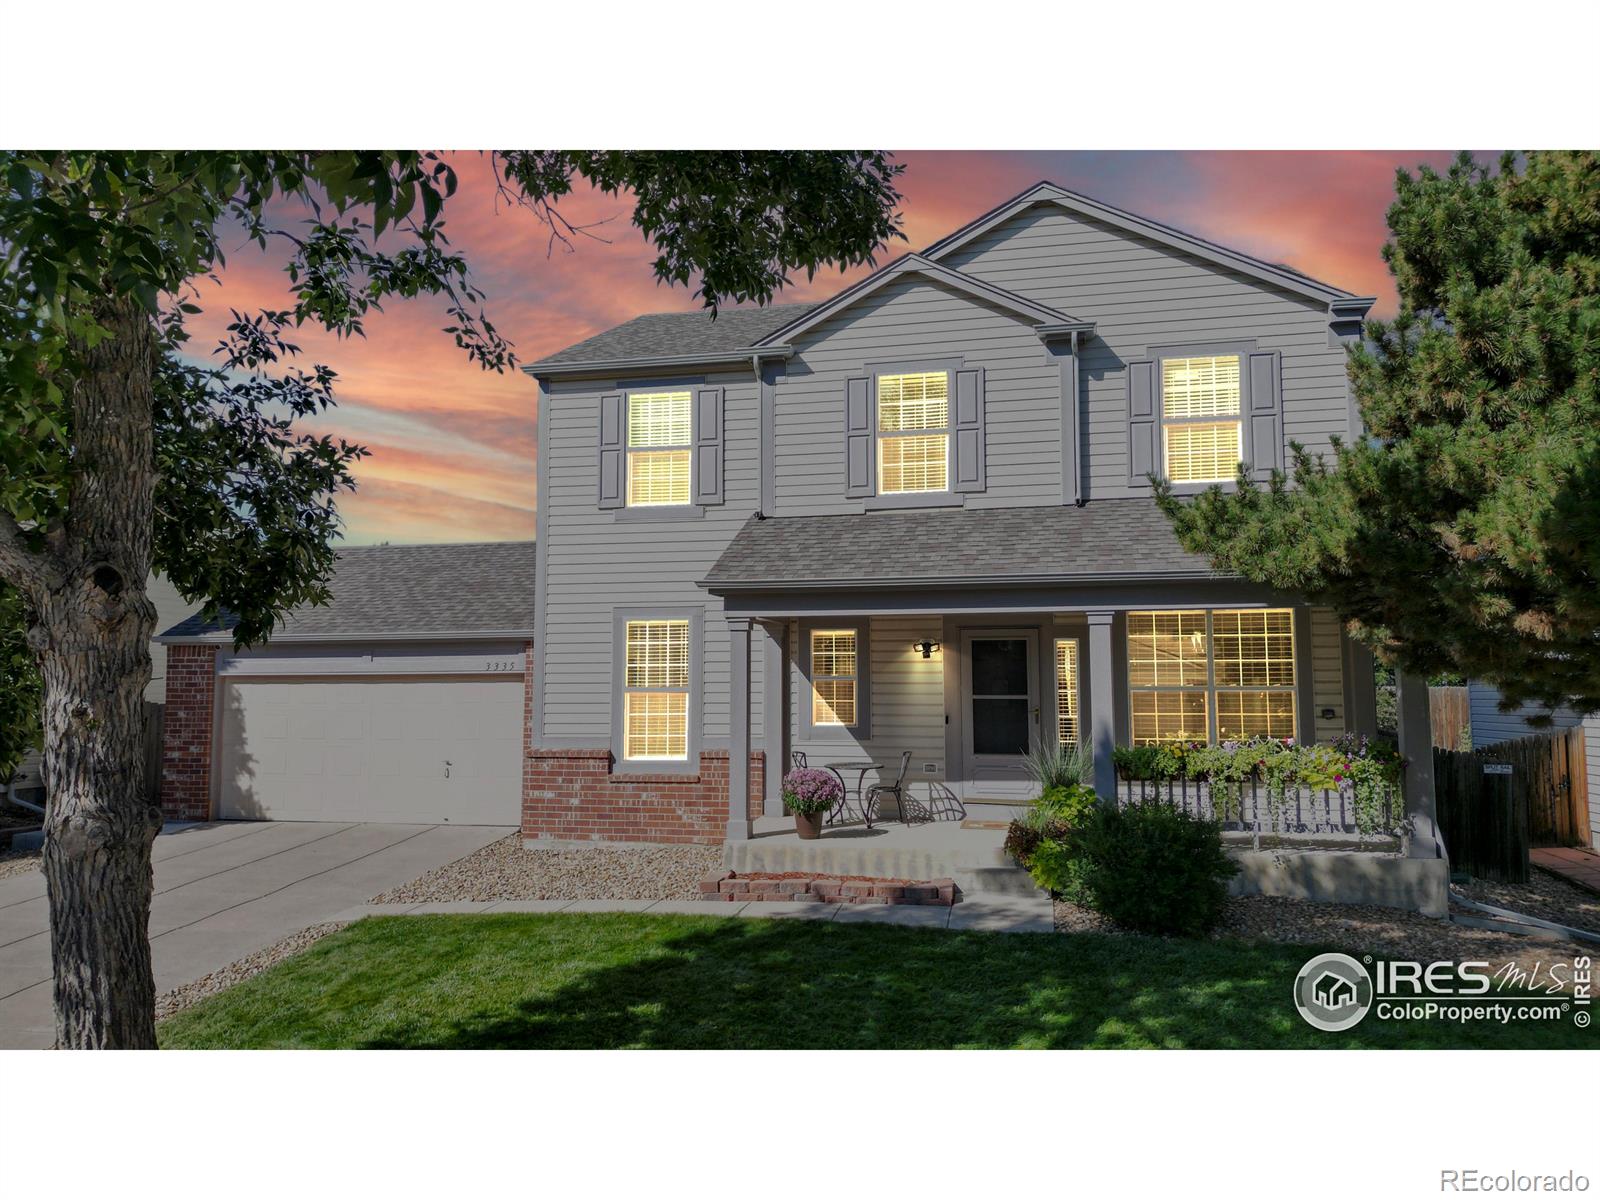 Report Image for 3335 S Nelson Street,Lakewood, Colorado